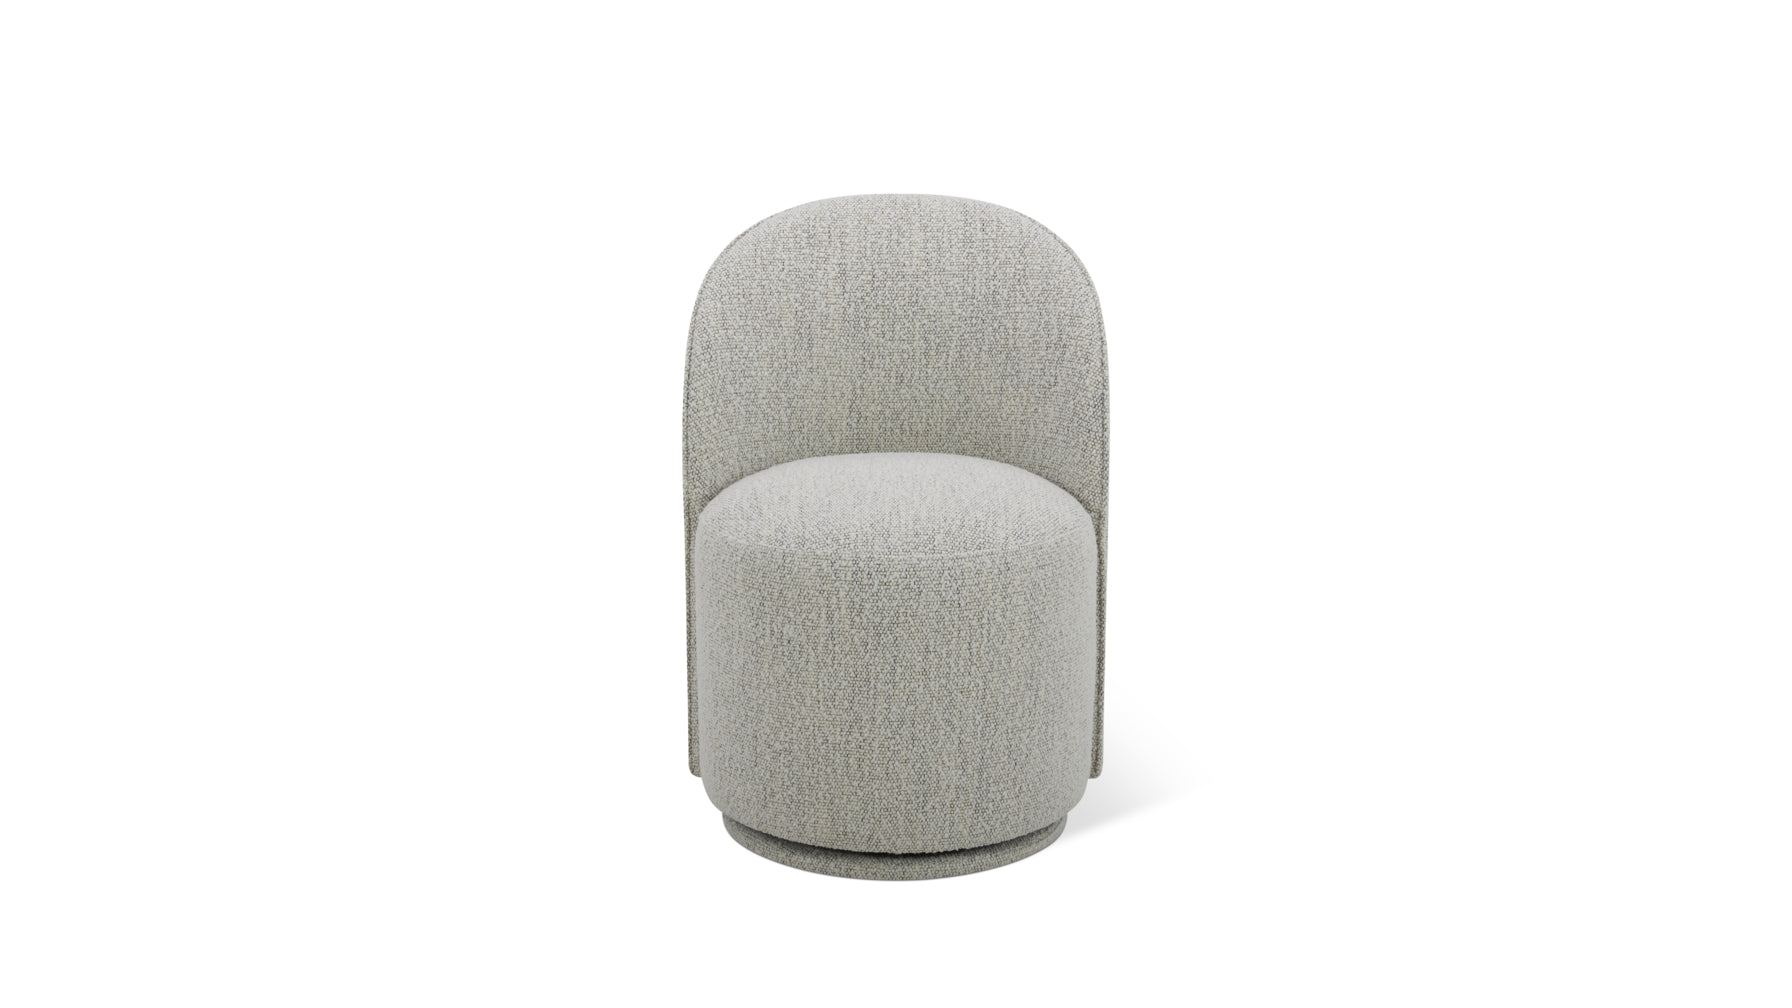 Dialed In Swivel Dining Chair, Arctic - Image 4